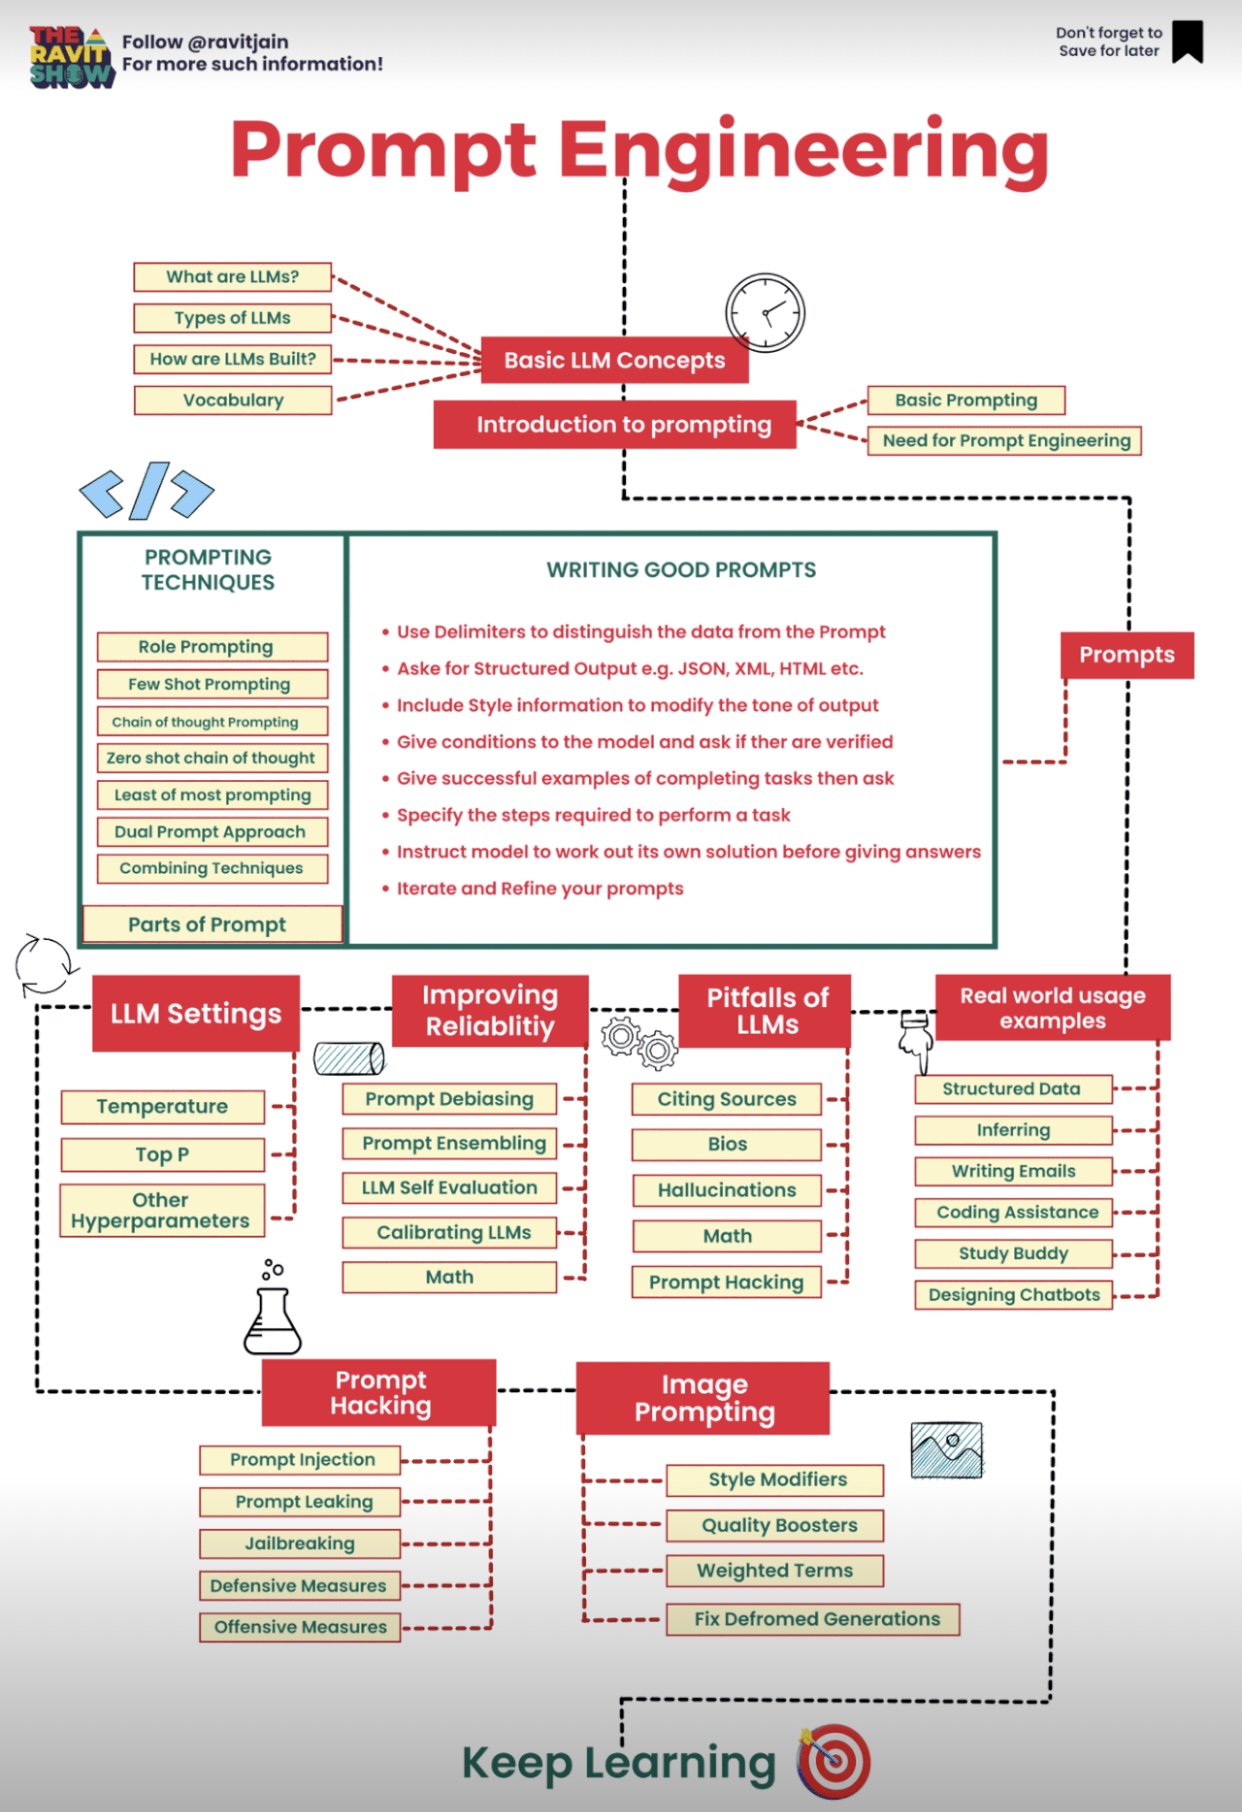 An overview of prompt engineering as a flow chart. Source: Ravit Jain